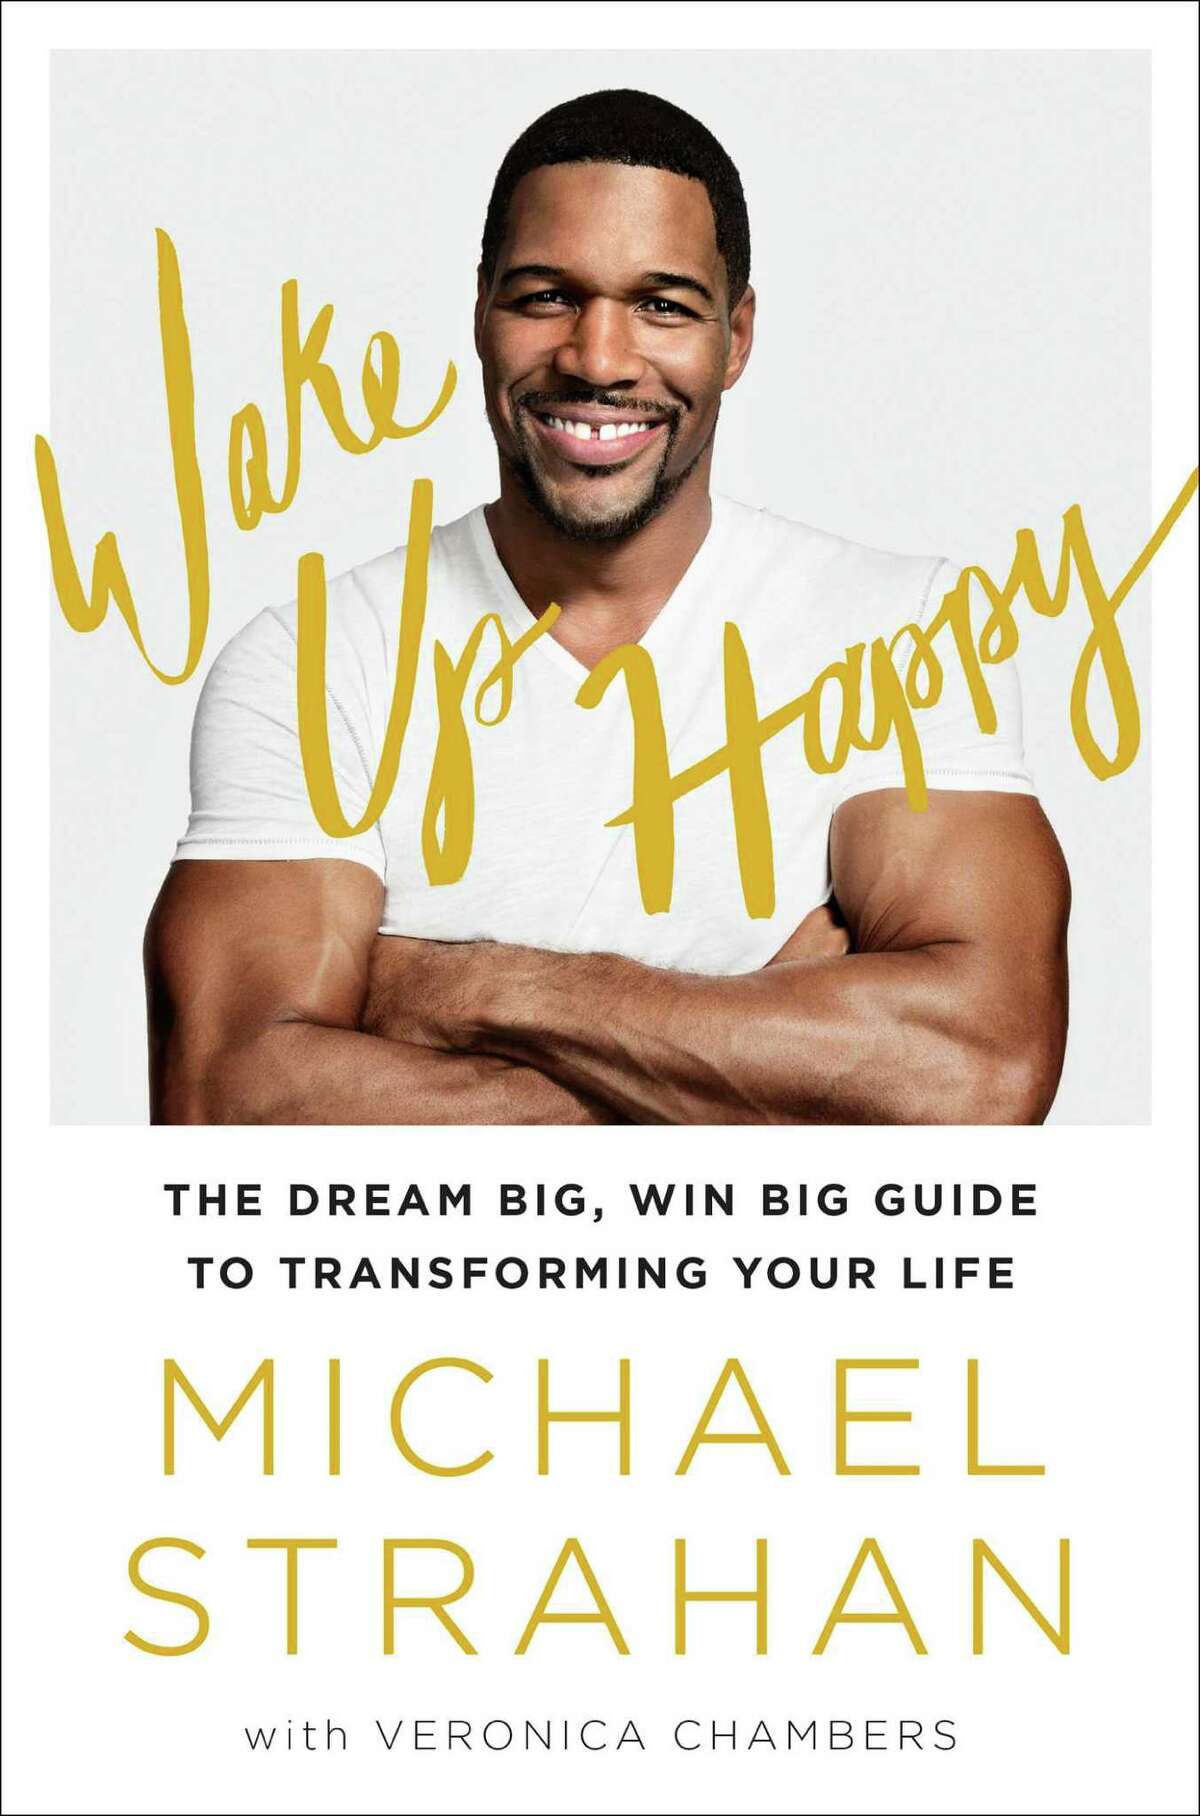 "Wake Up Happy" by Michael Strahan